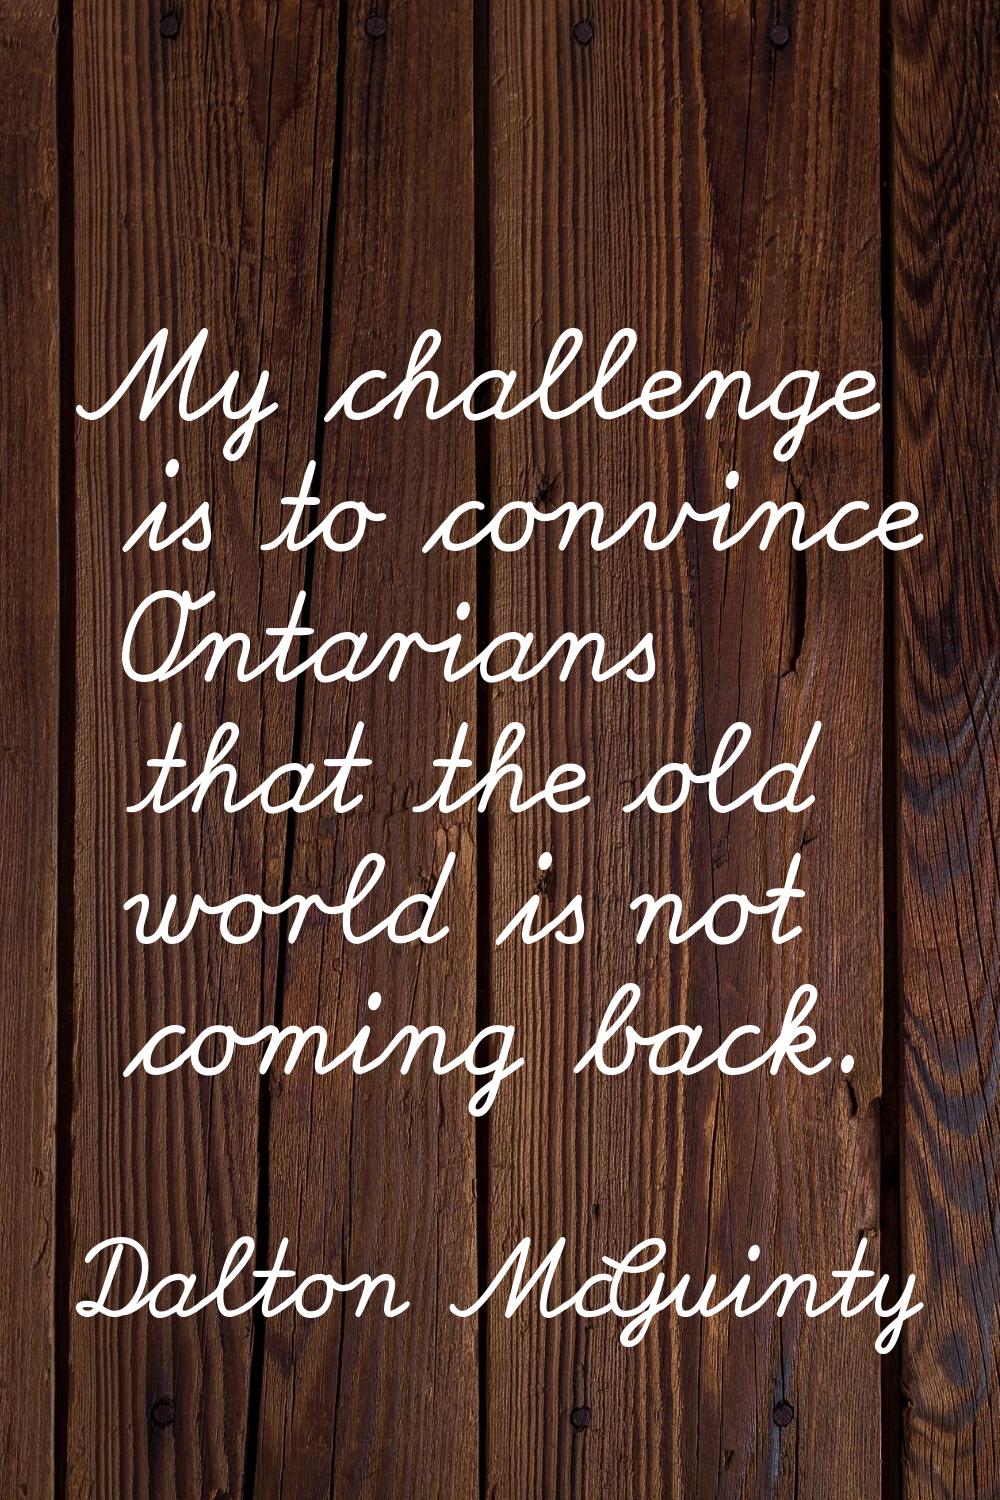 My challenge is to convince Ontarians that the old world is not coming back.